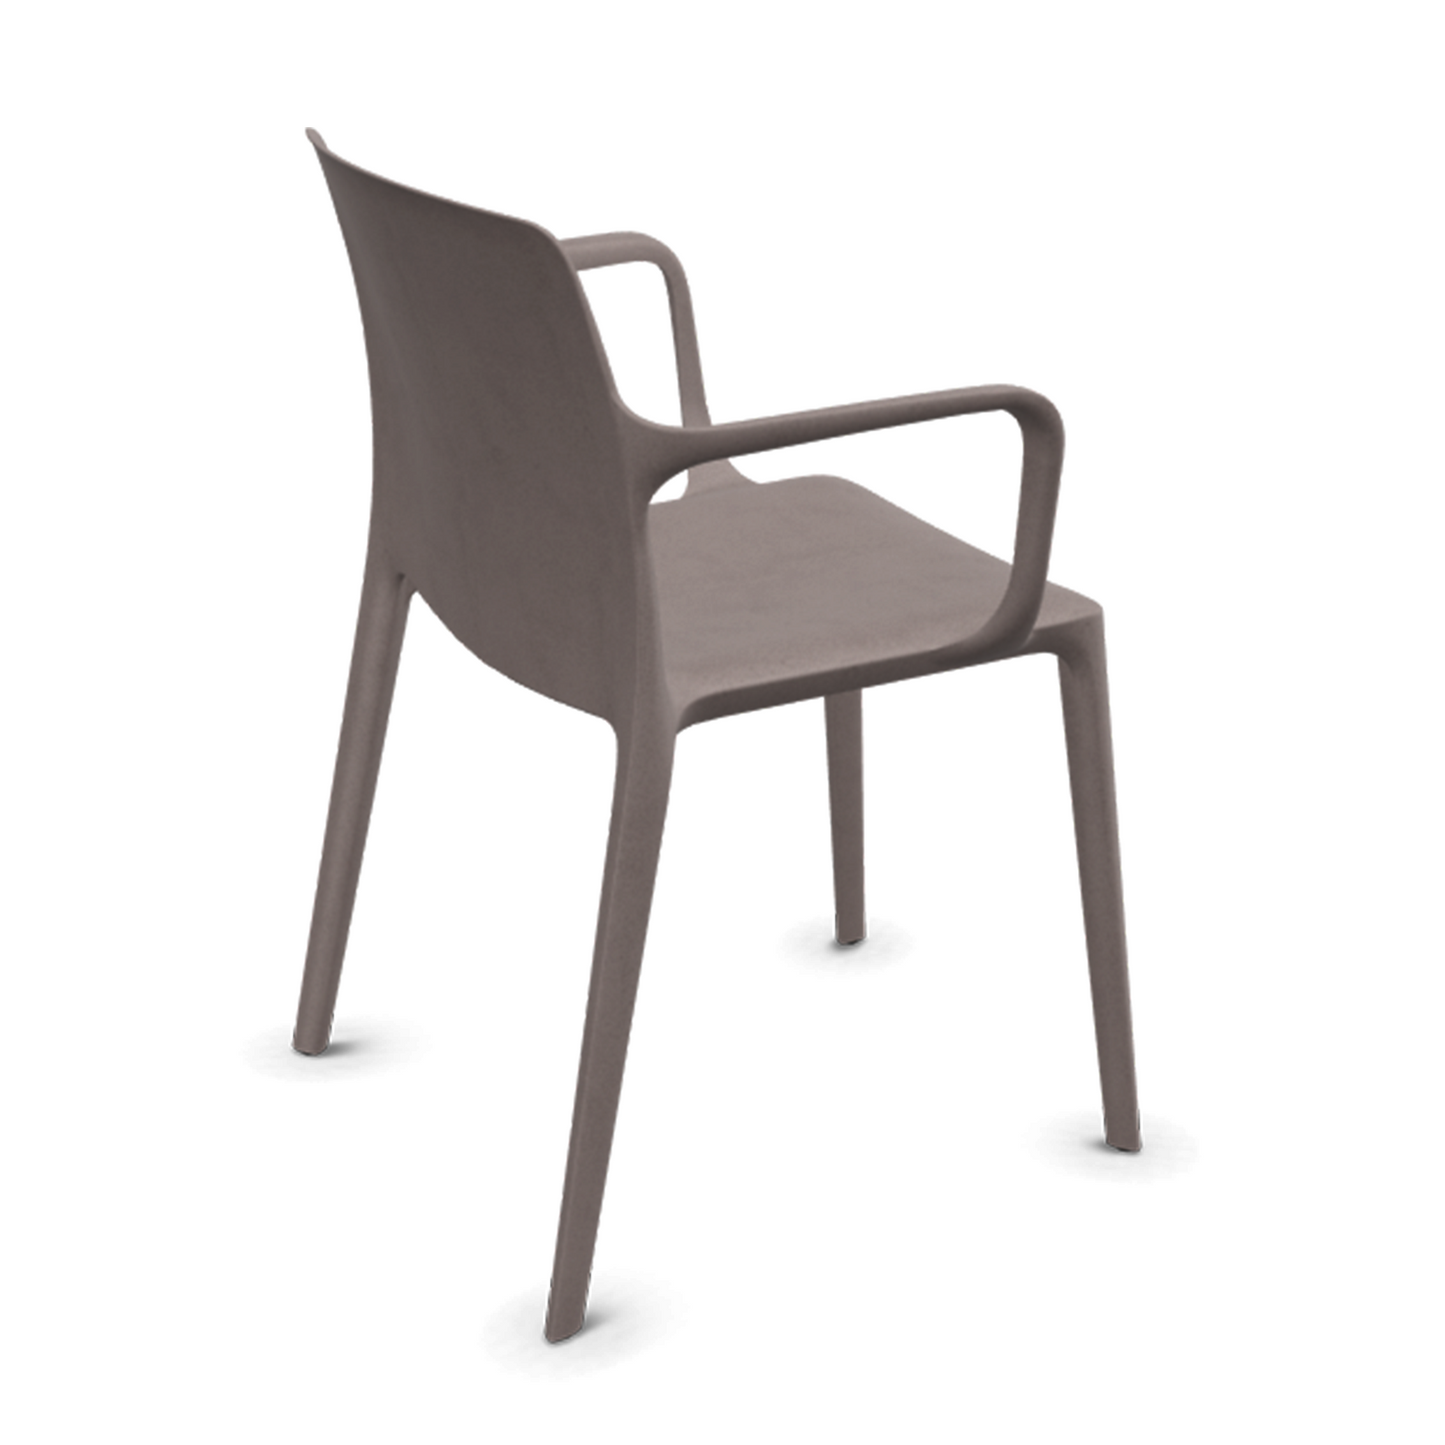 Actiu Fluit Chair with Arms Offwhite ACTFL16001044P21